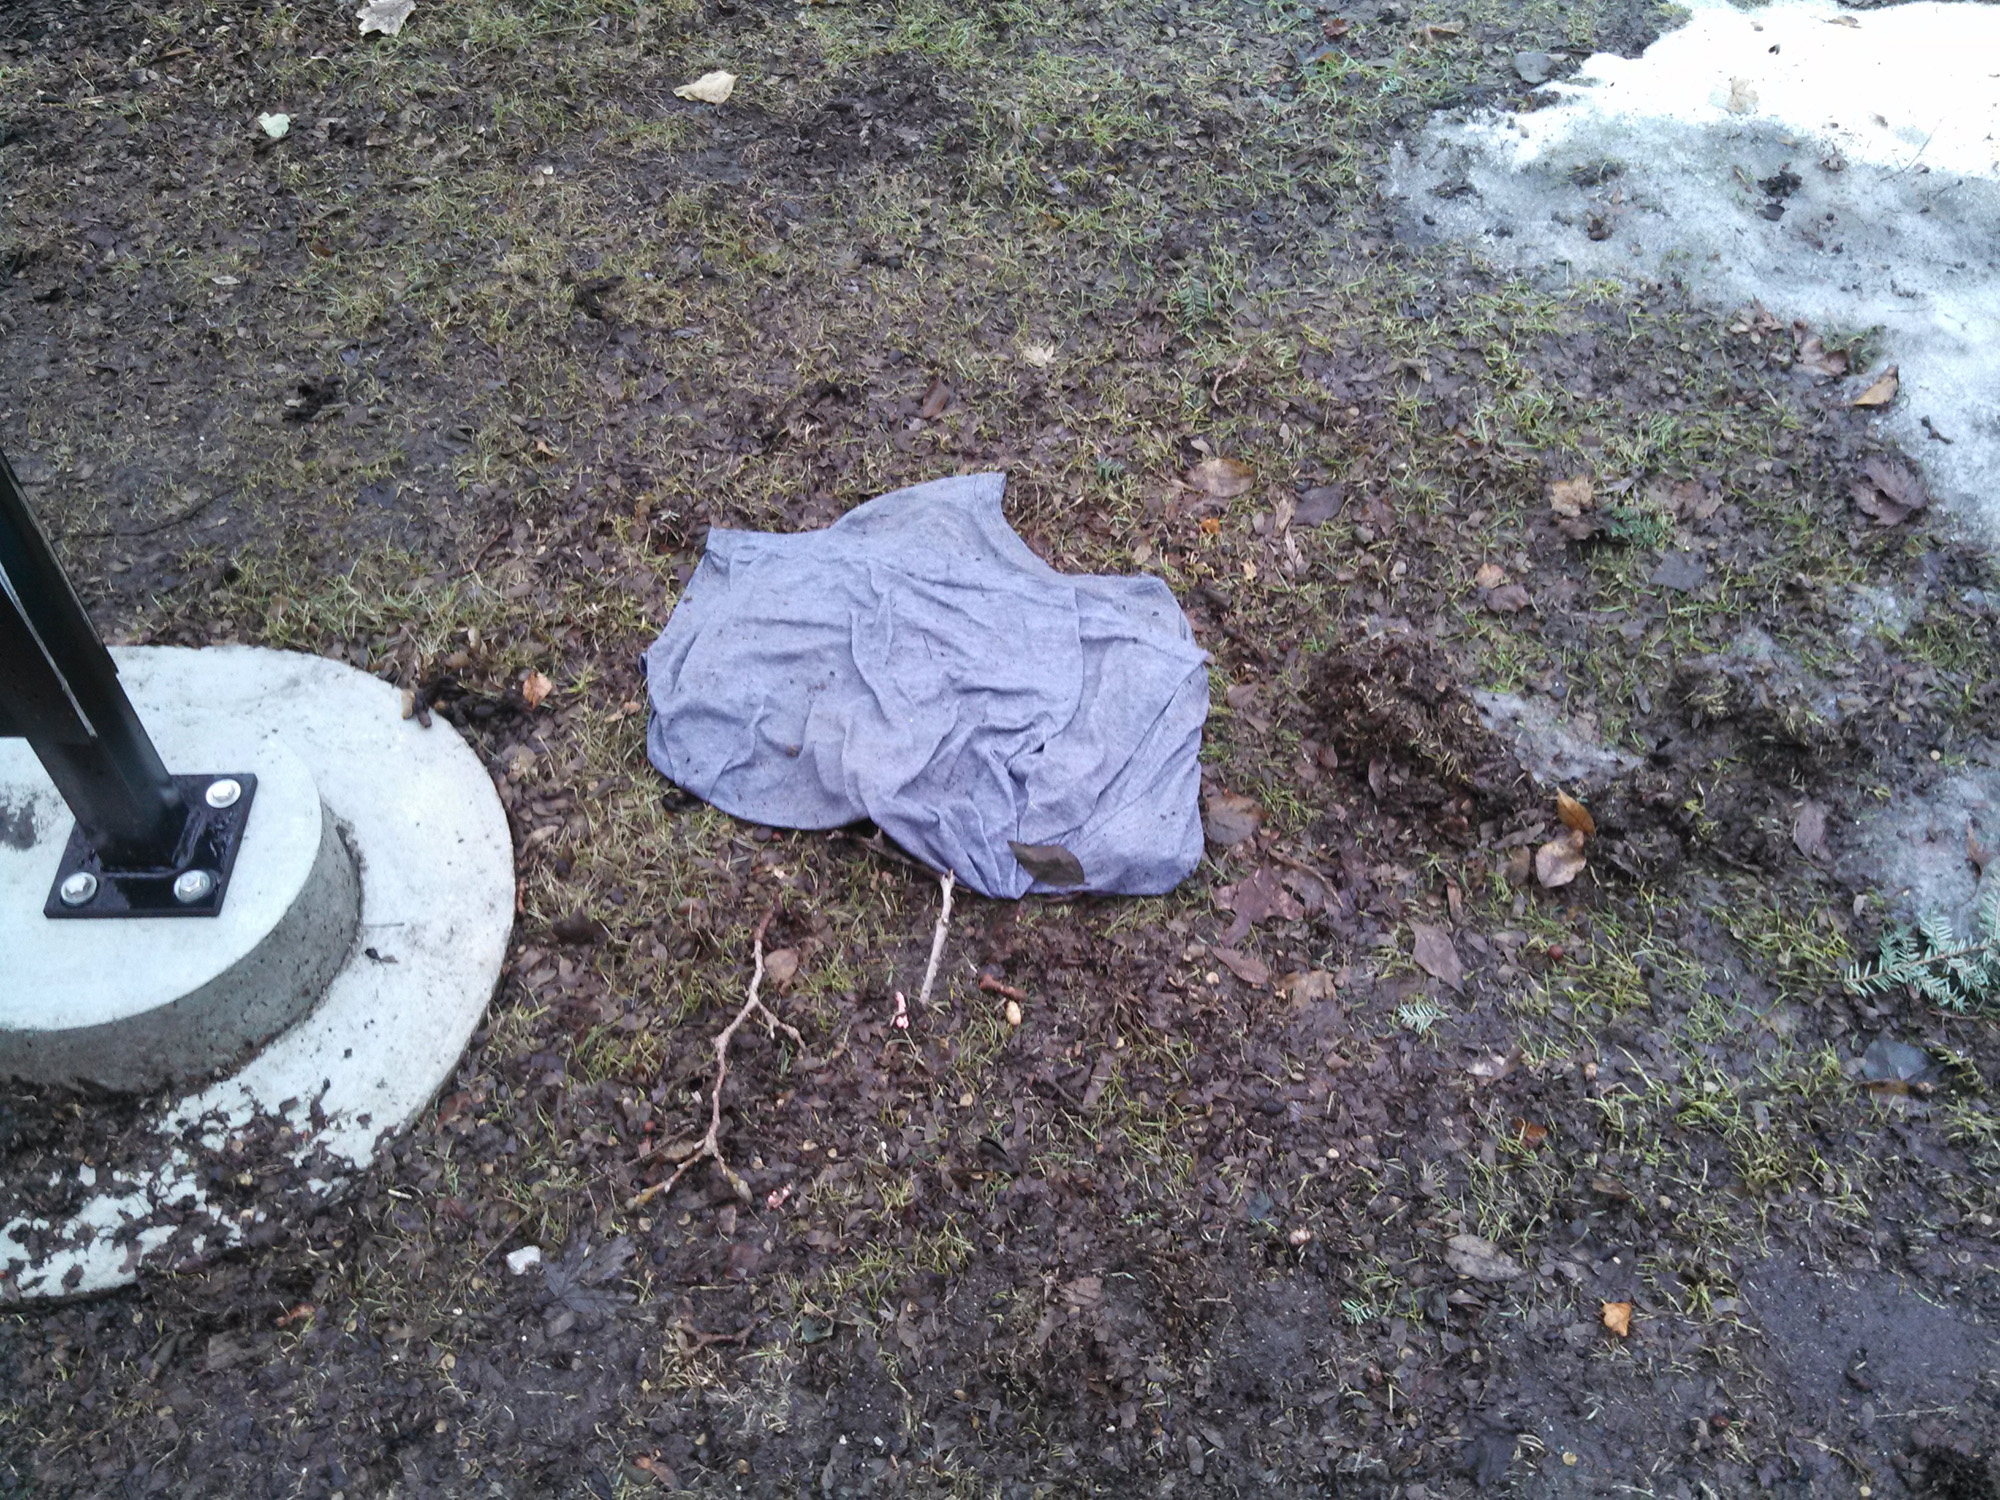 A waterlogged T-shirt found under the melting snow on campus